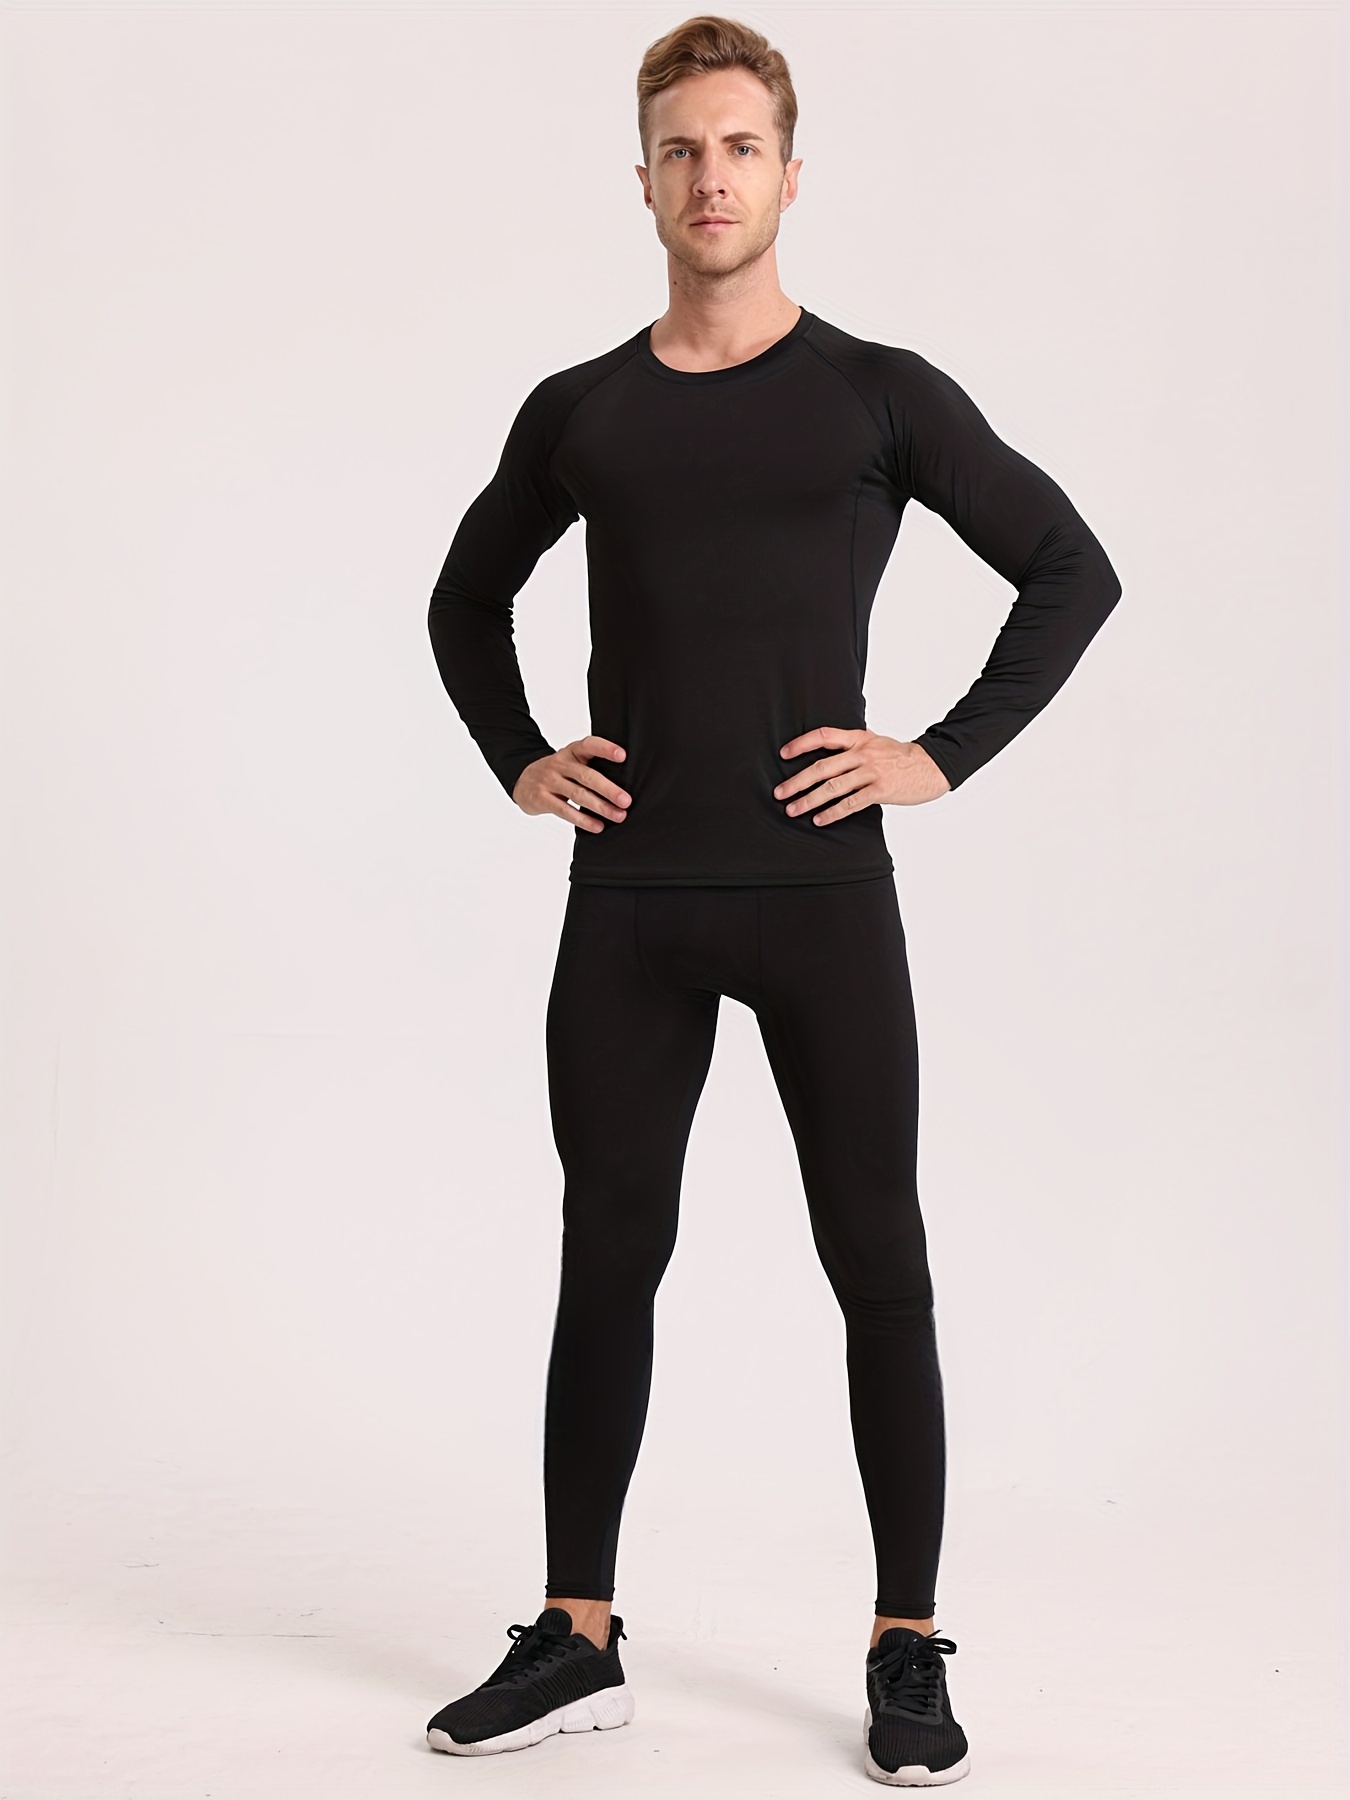 Thermal Underwear Set for Kids Long Johns Fleece Lined Base Layer Top &  Bottom